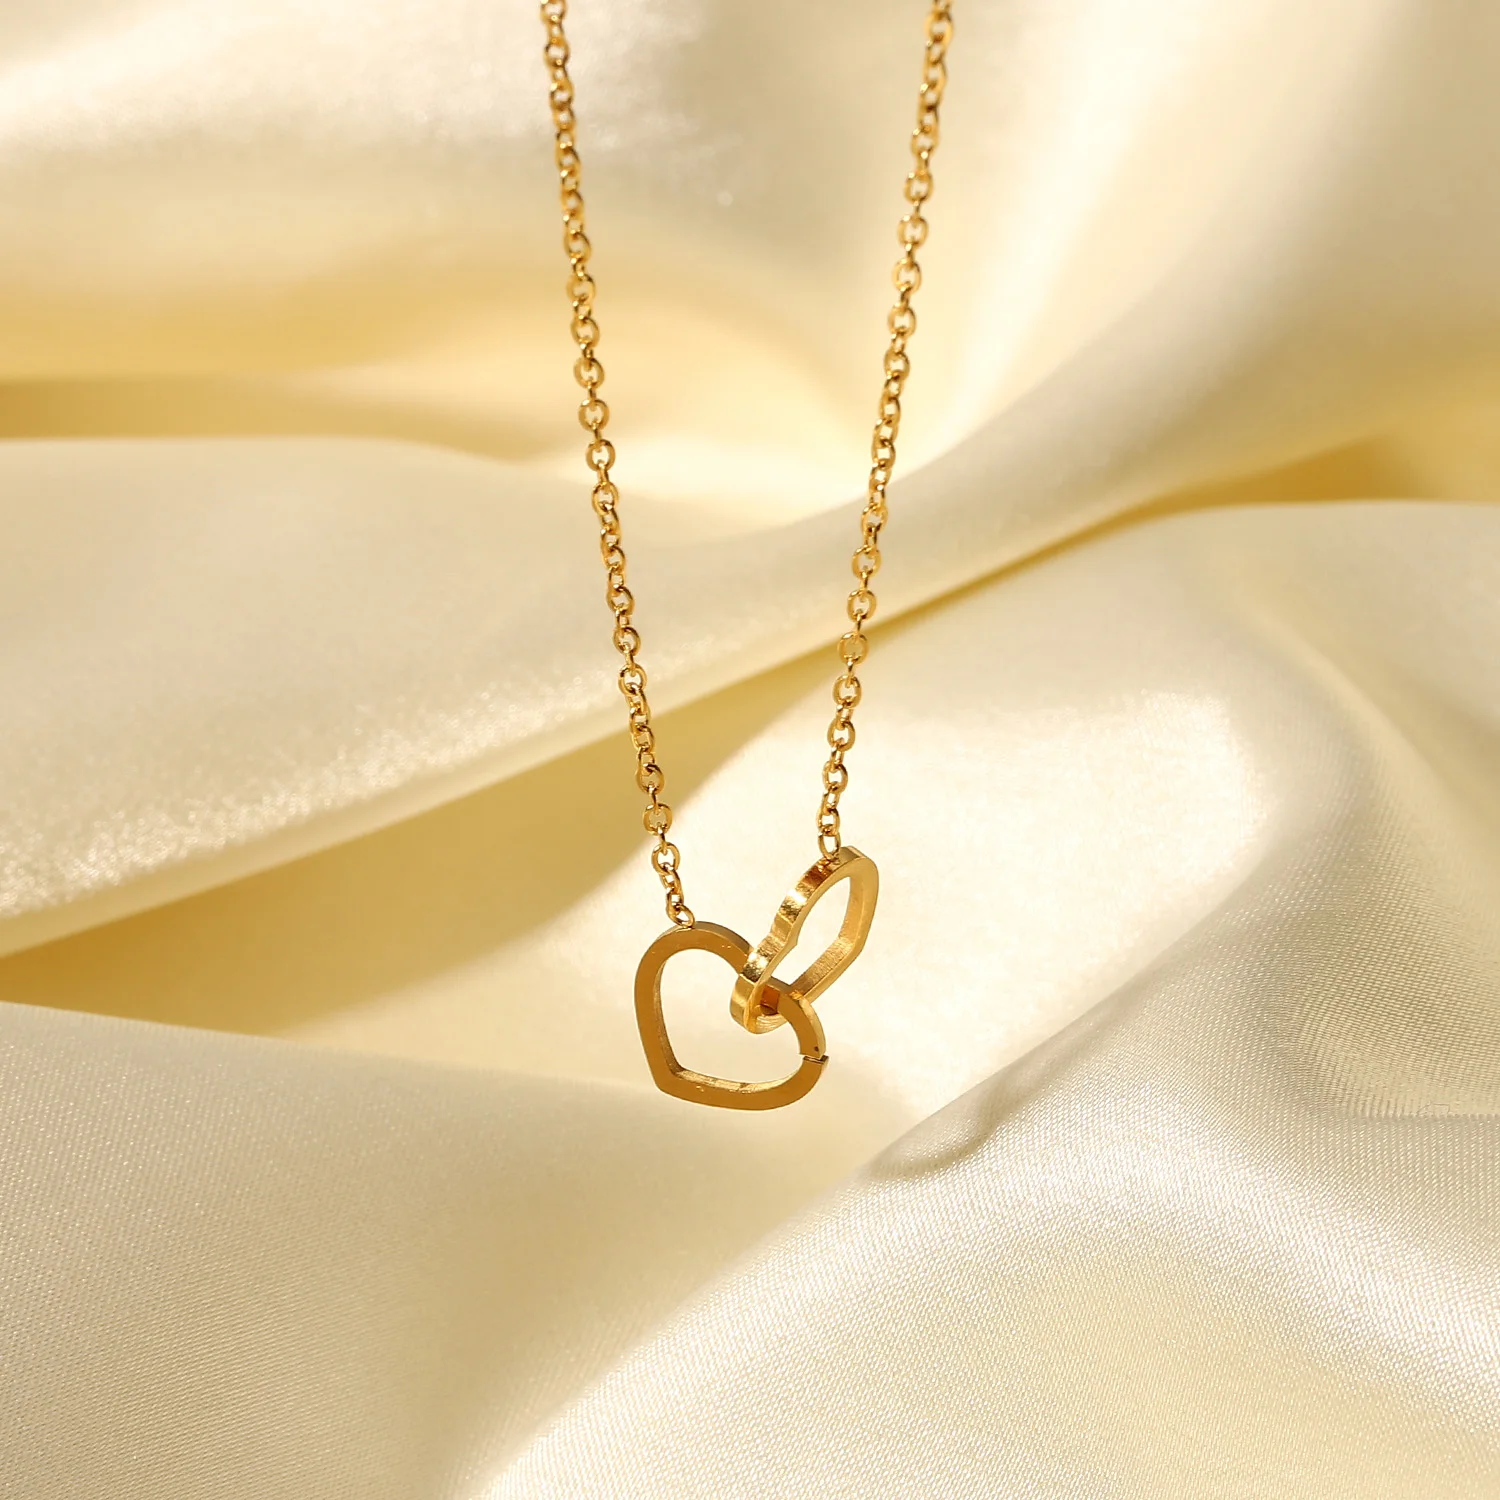 Romantic Gift Stainless Steel 18k Gold-plated Thin Chain Double Heart ...